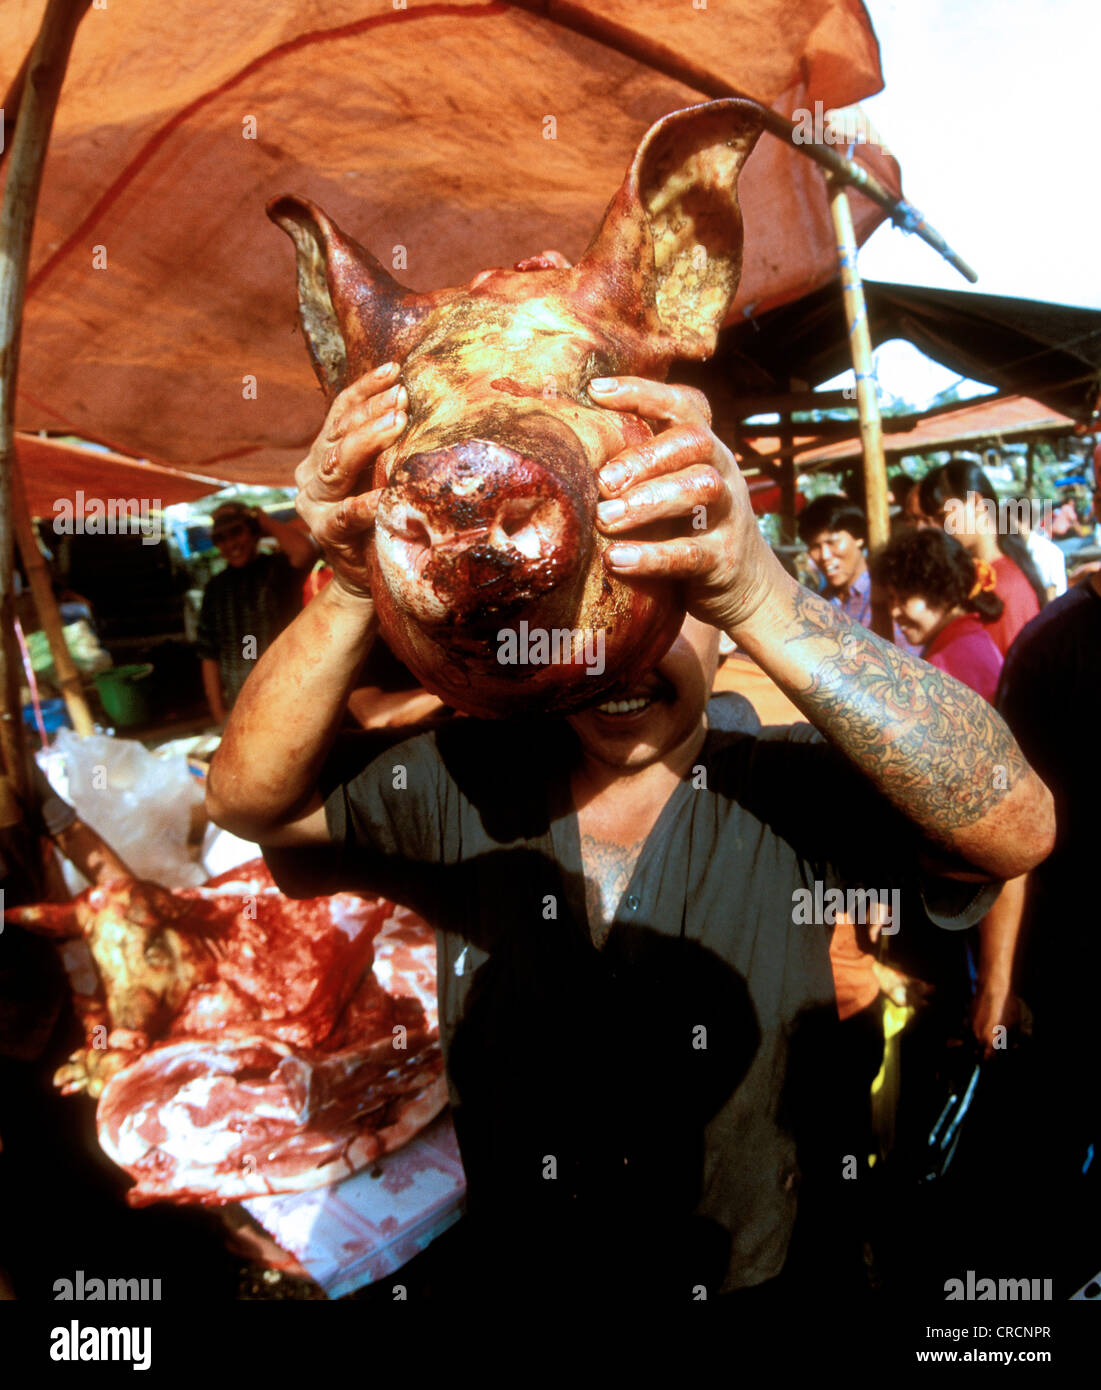 saturday market in the village of Tomahon. A butcher with newly slaughtered pig head, Indonesia, Sulawesi Stock Photo